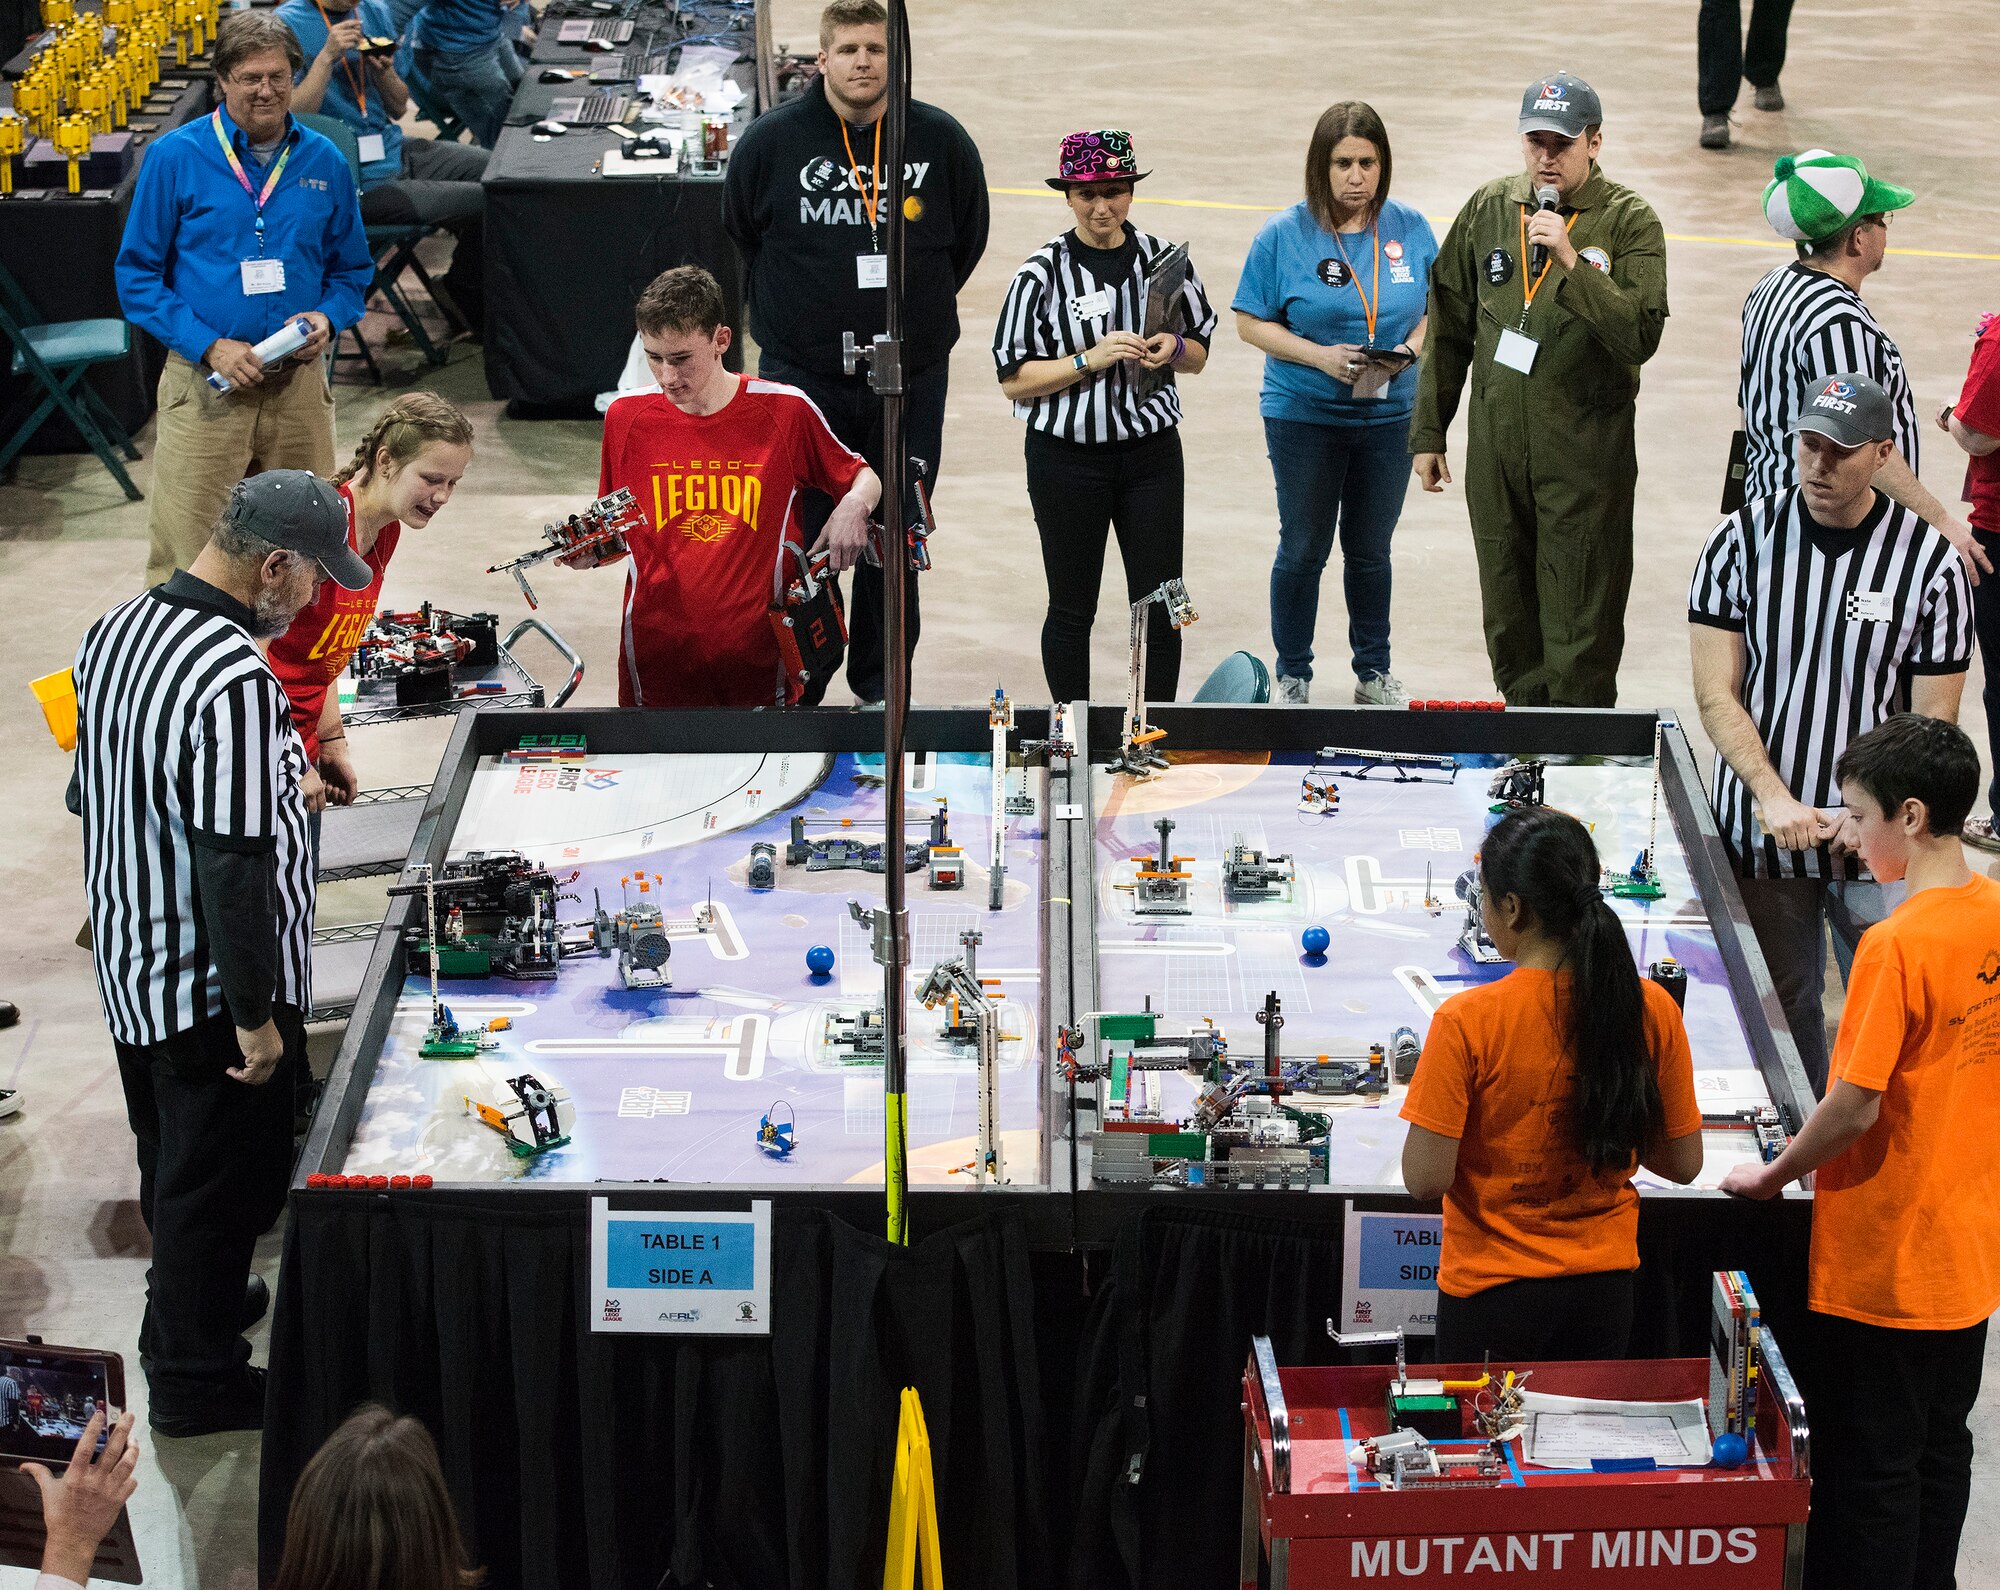 Two teams put their robots through their paces in the second round of the FIRST LEGO League Ohio championship tournament Feb. 3 in Wright State University’s Ervin J. Nutter Center.